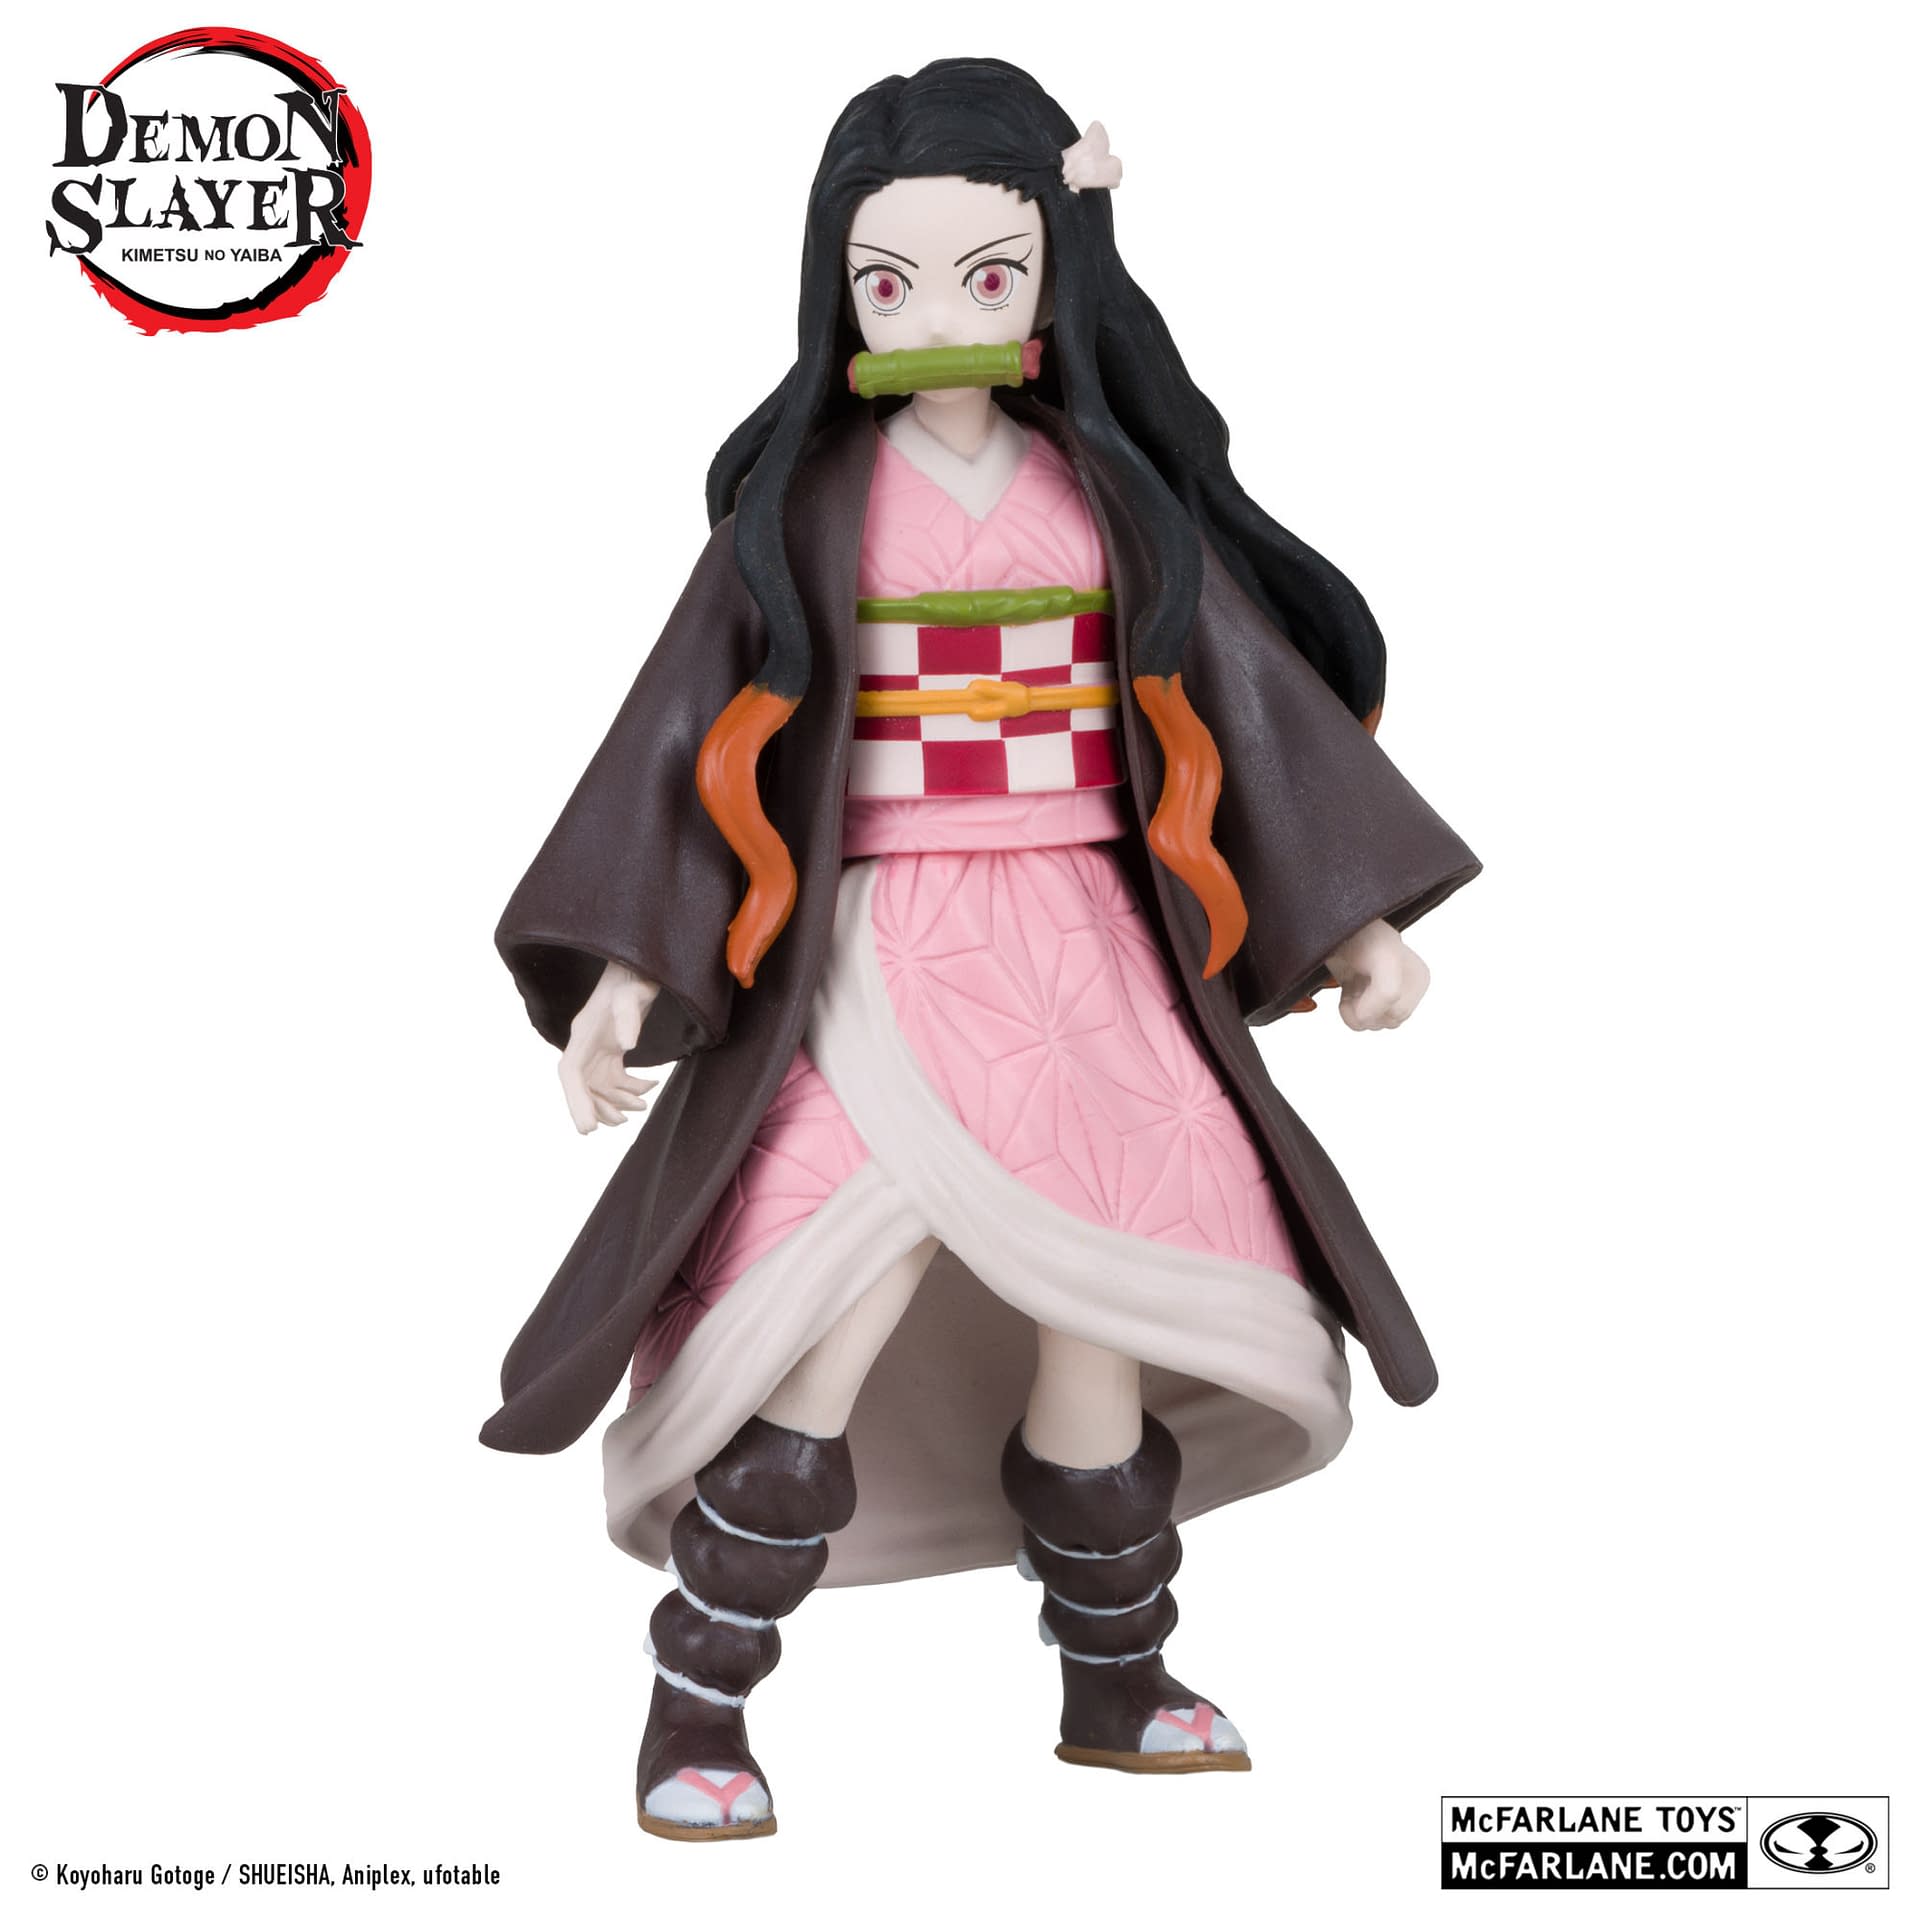 More Demon Slayer Figures Arriving at McFarlane Toys in 5" Scale